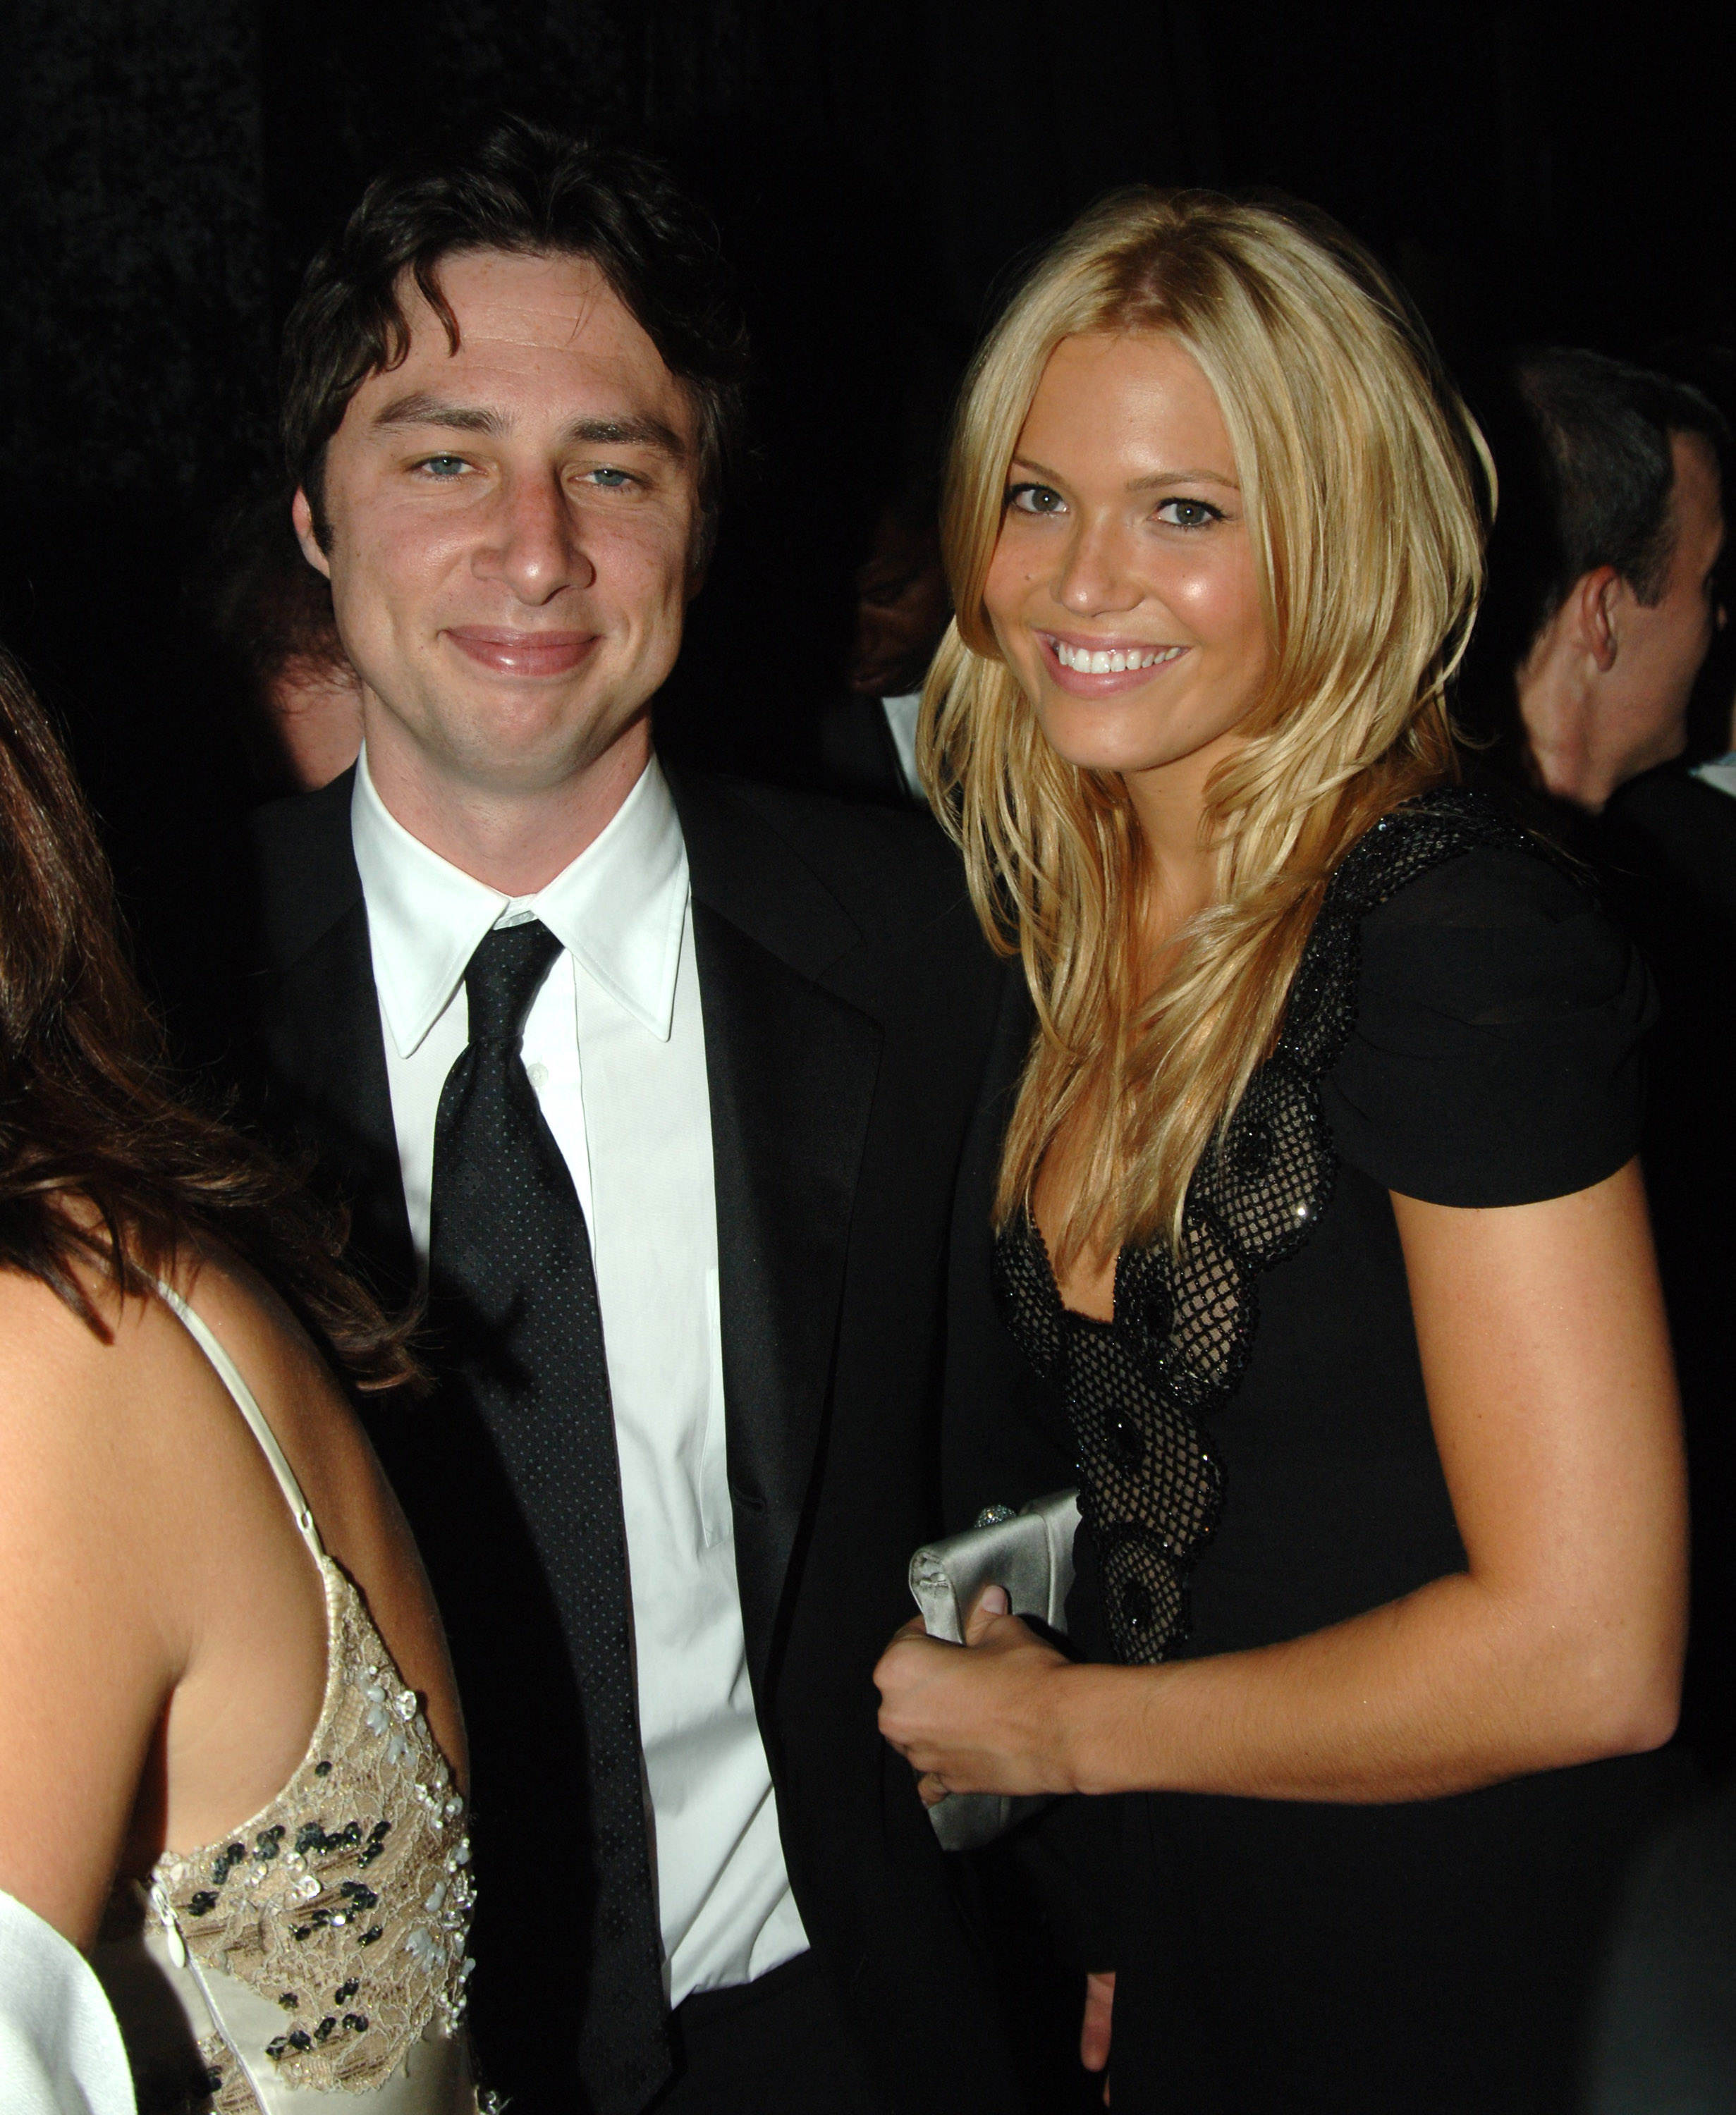 Zach in a suit and tie next to Mandy in a black dress with unique neckline at event